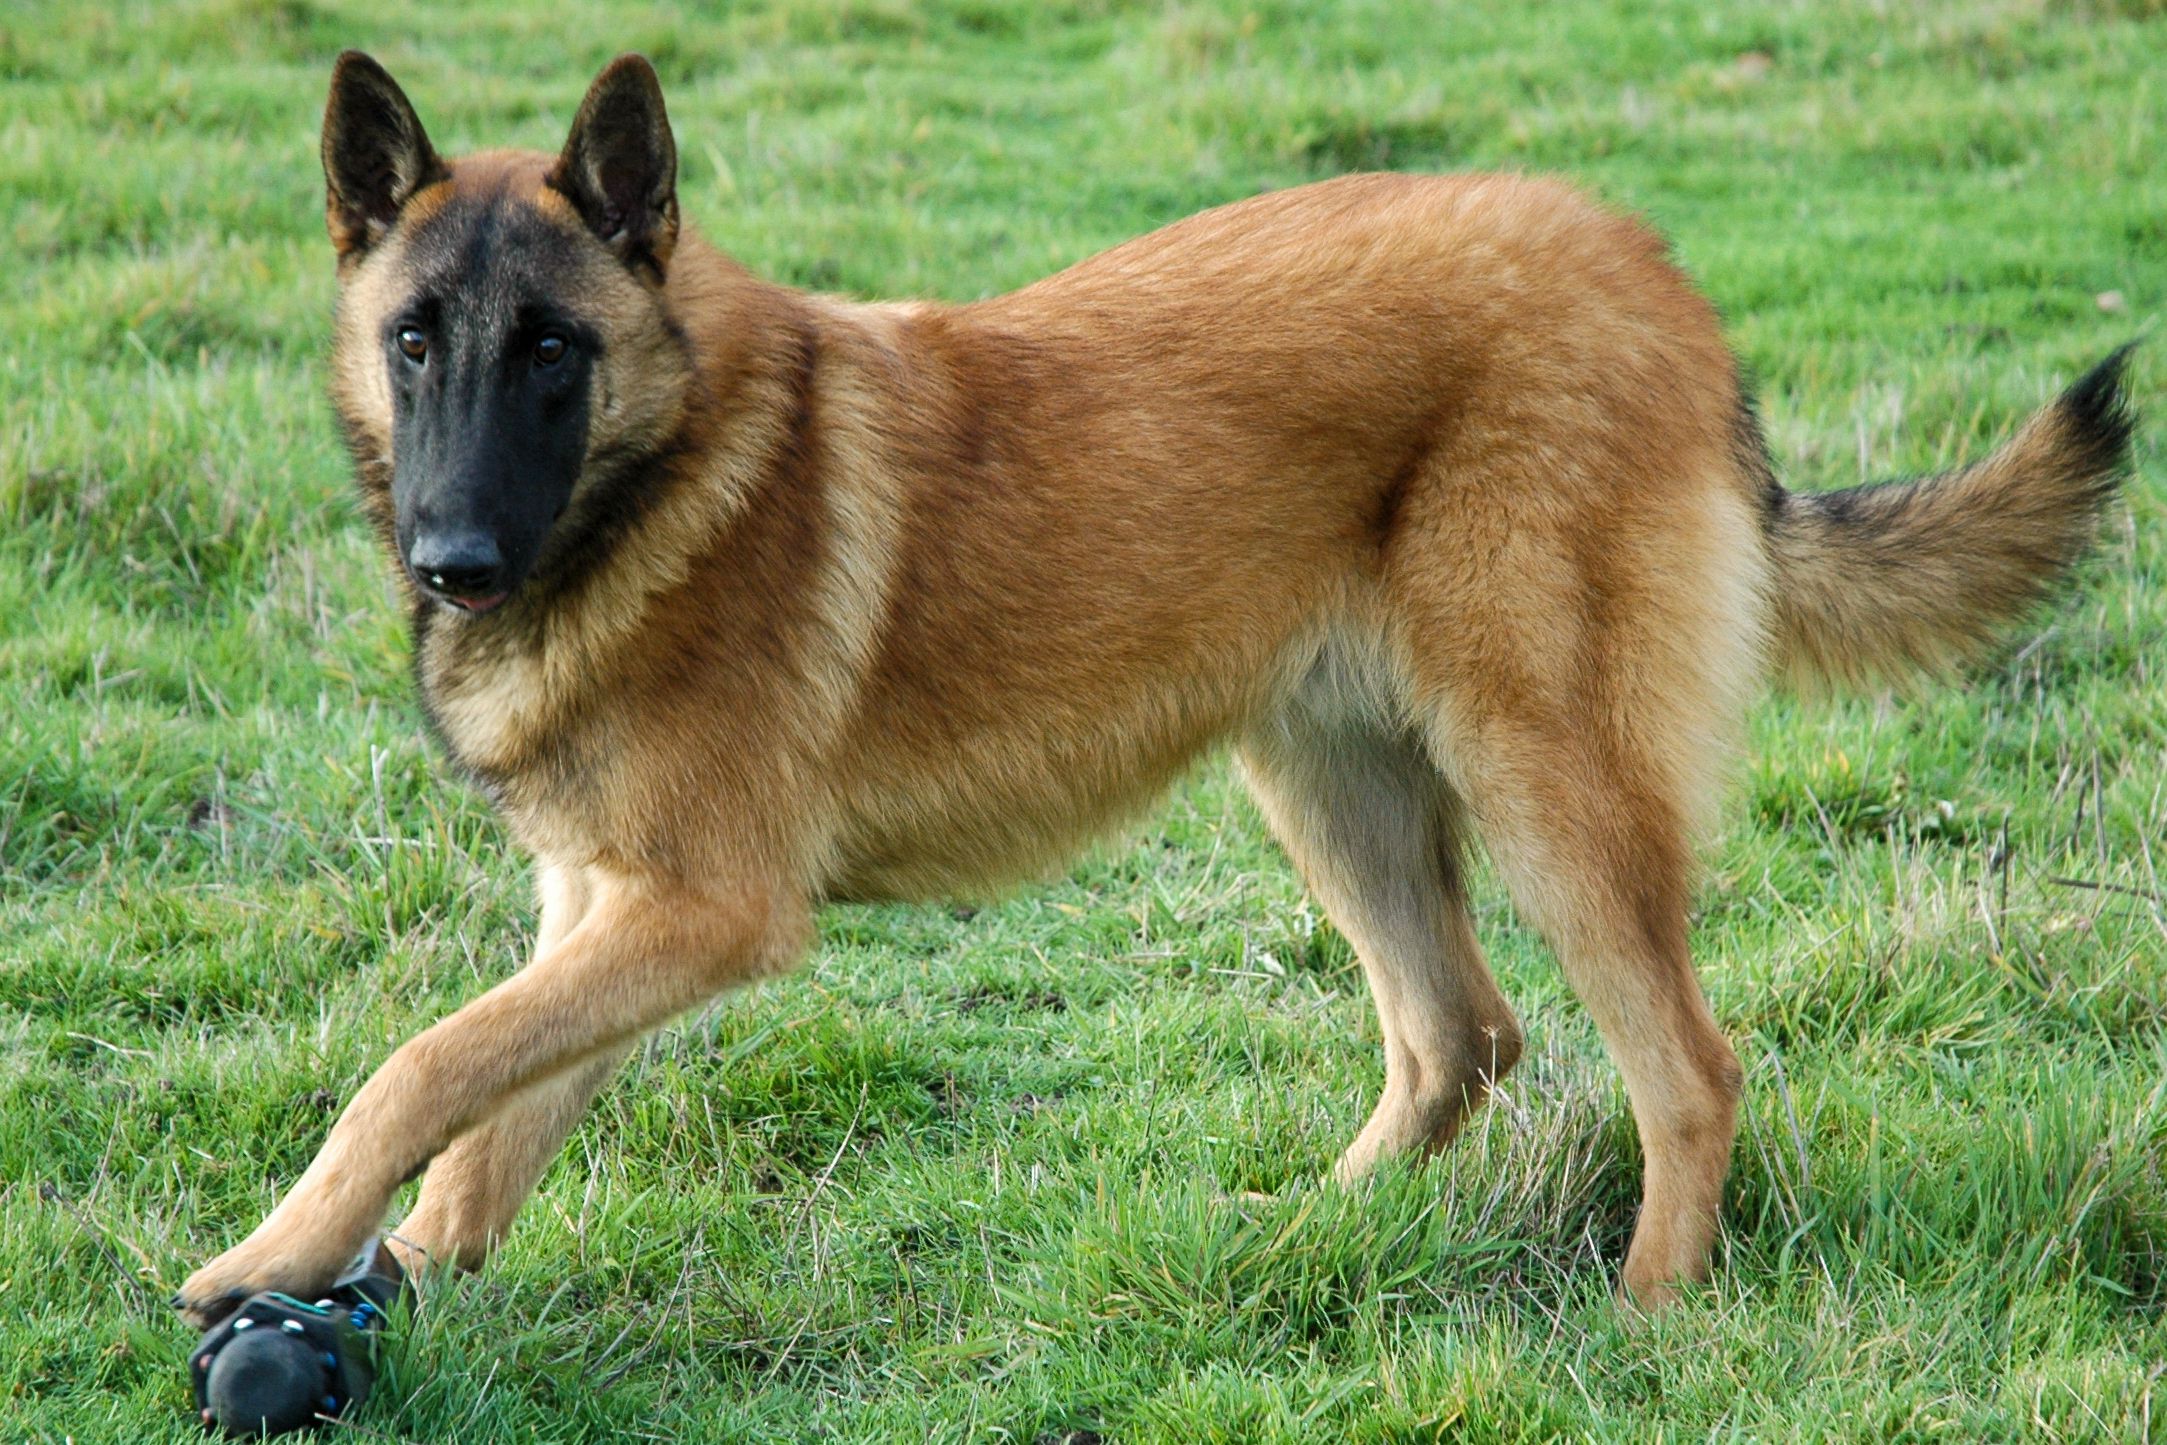 Why authorities are looking for a Sh700k elite Belgian Malinois dog that went missing